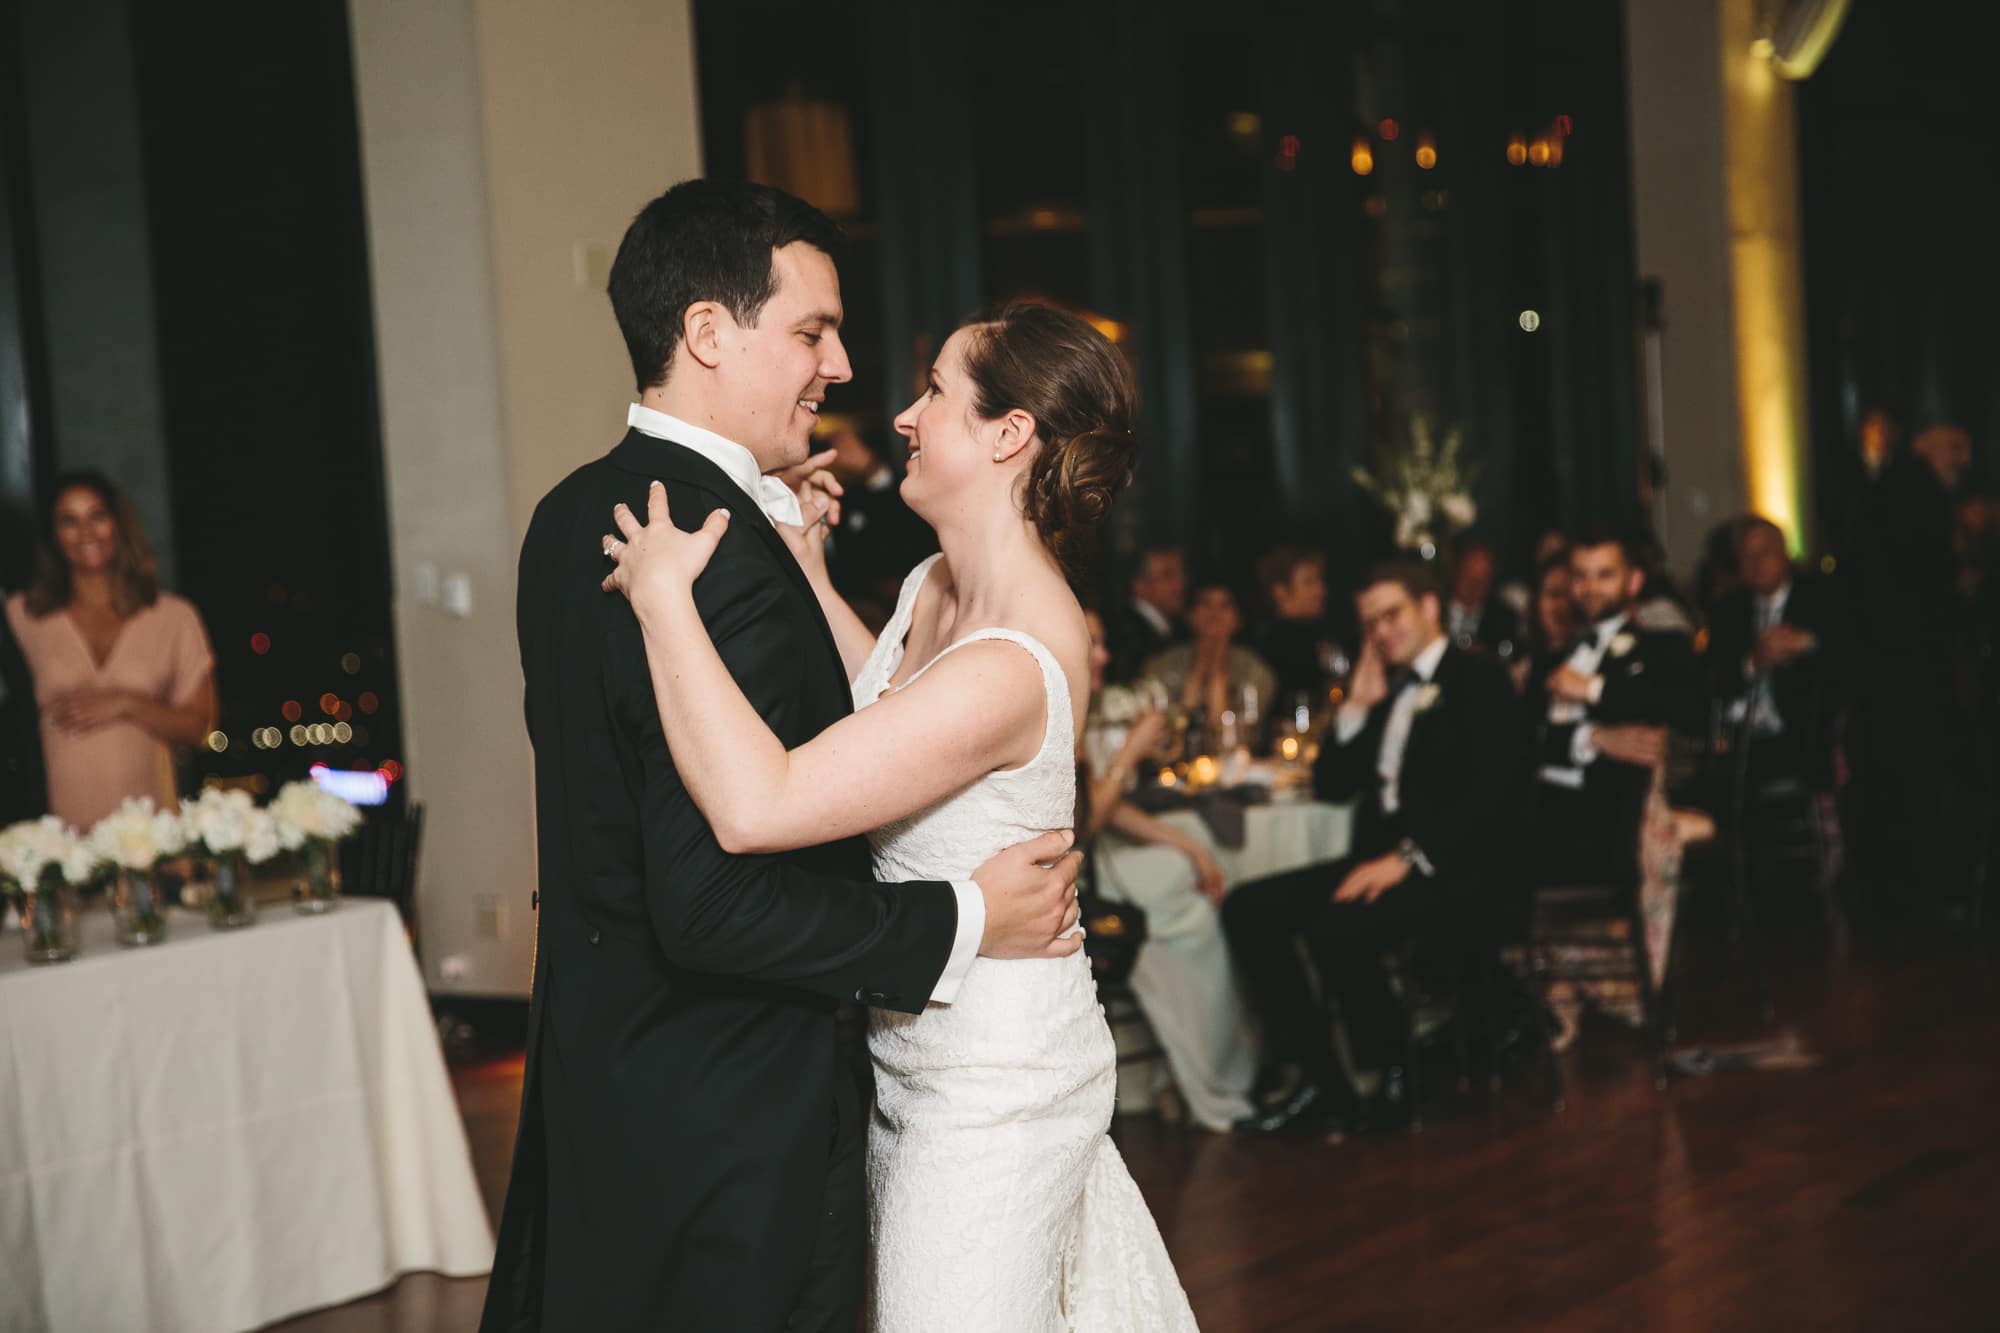 A documentary photograph of a bride and groom sharing a first dance at their State Room Wedding